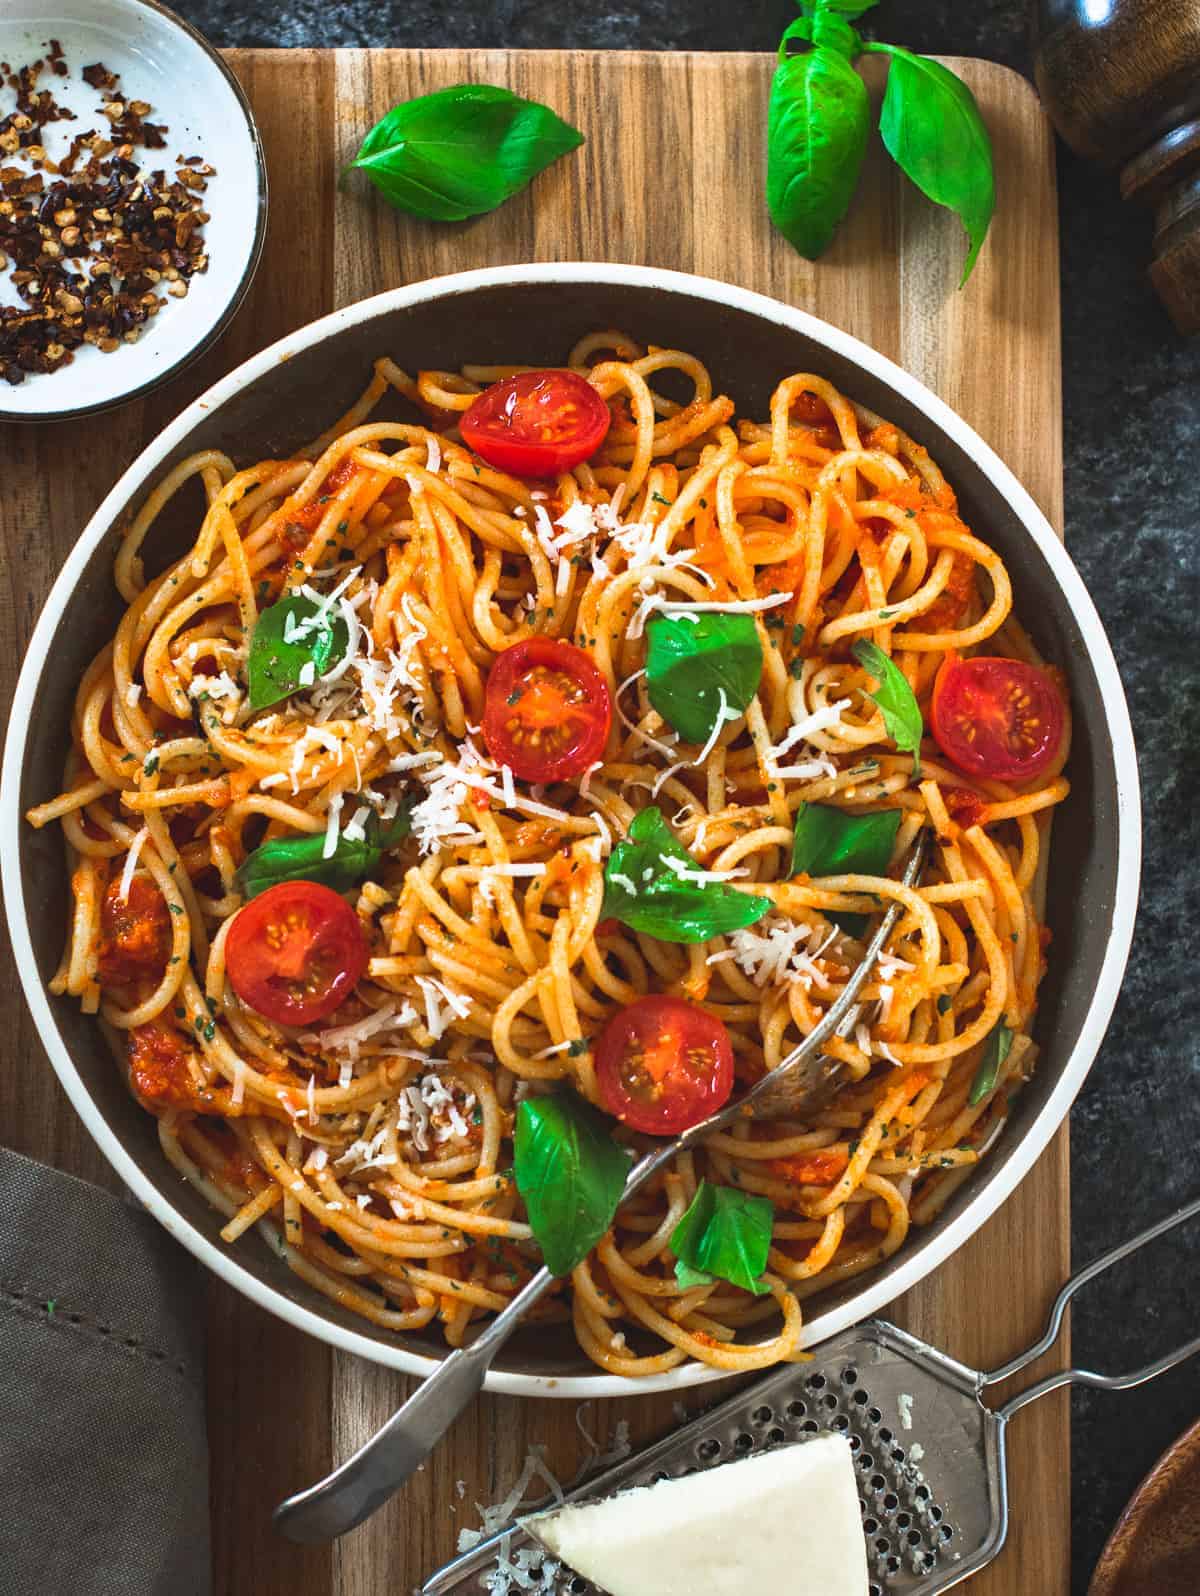 Spaghetti pasta in a brown dish with tomatoes